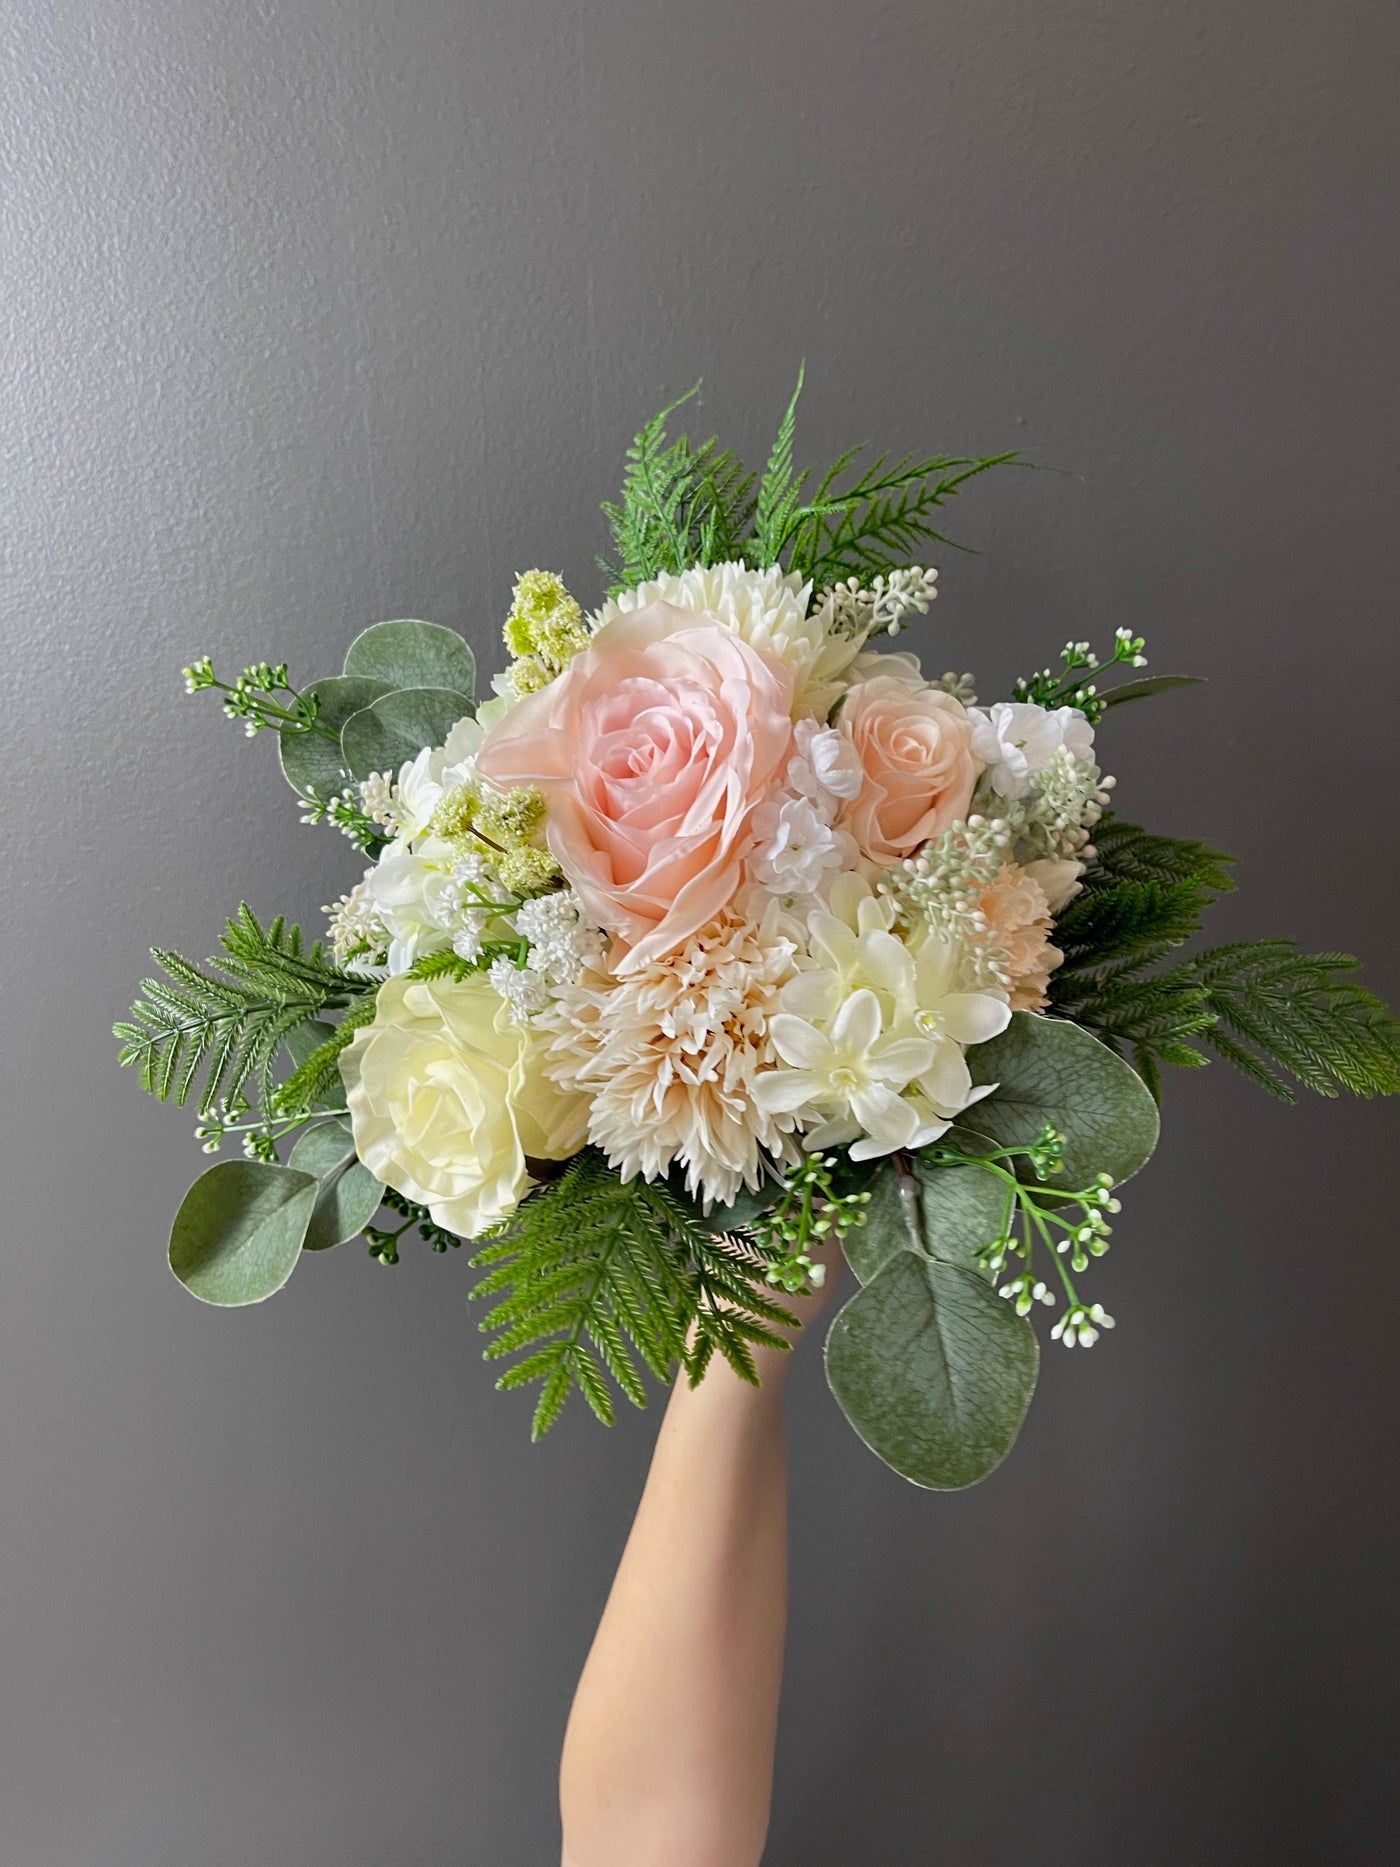 Rent  A Rose- Flower Girl Bouquet- Pink, cream and white. Rent for five days for $35.00